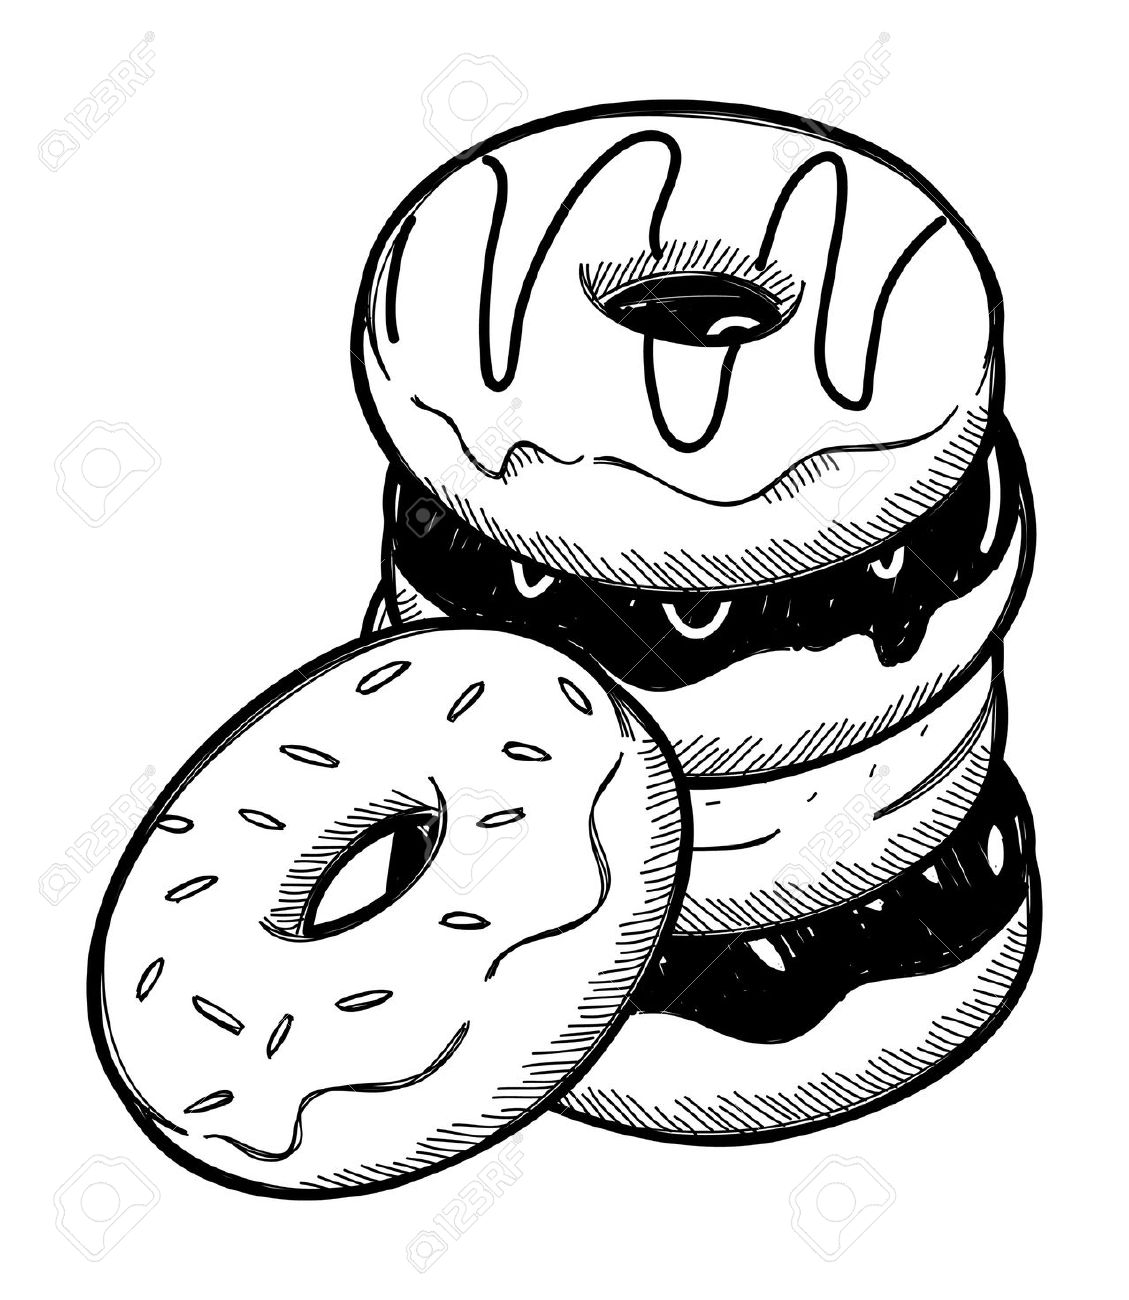 Donut Line Drawing